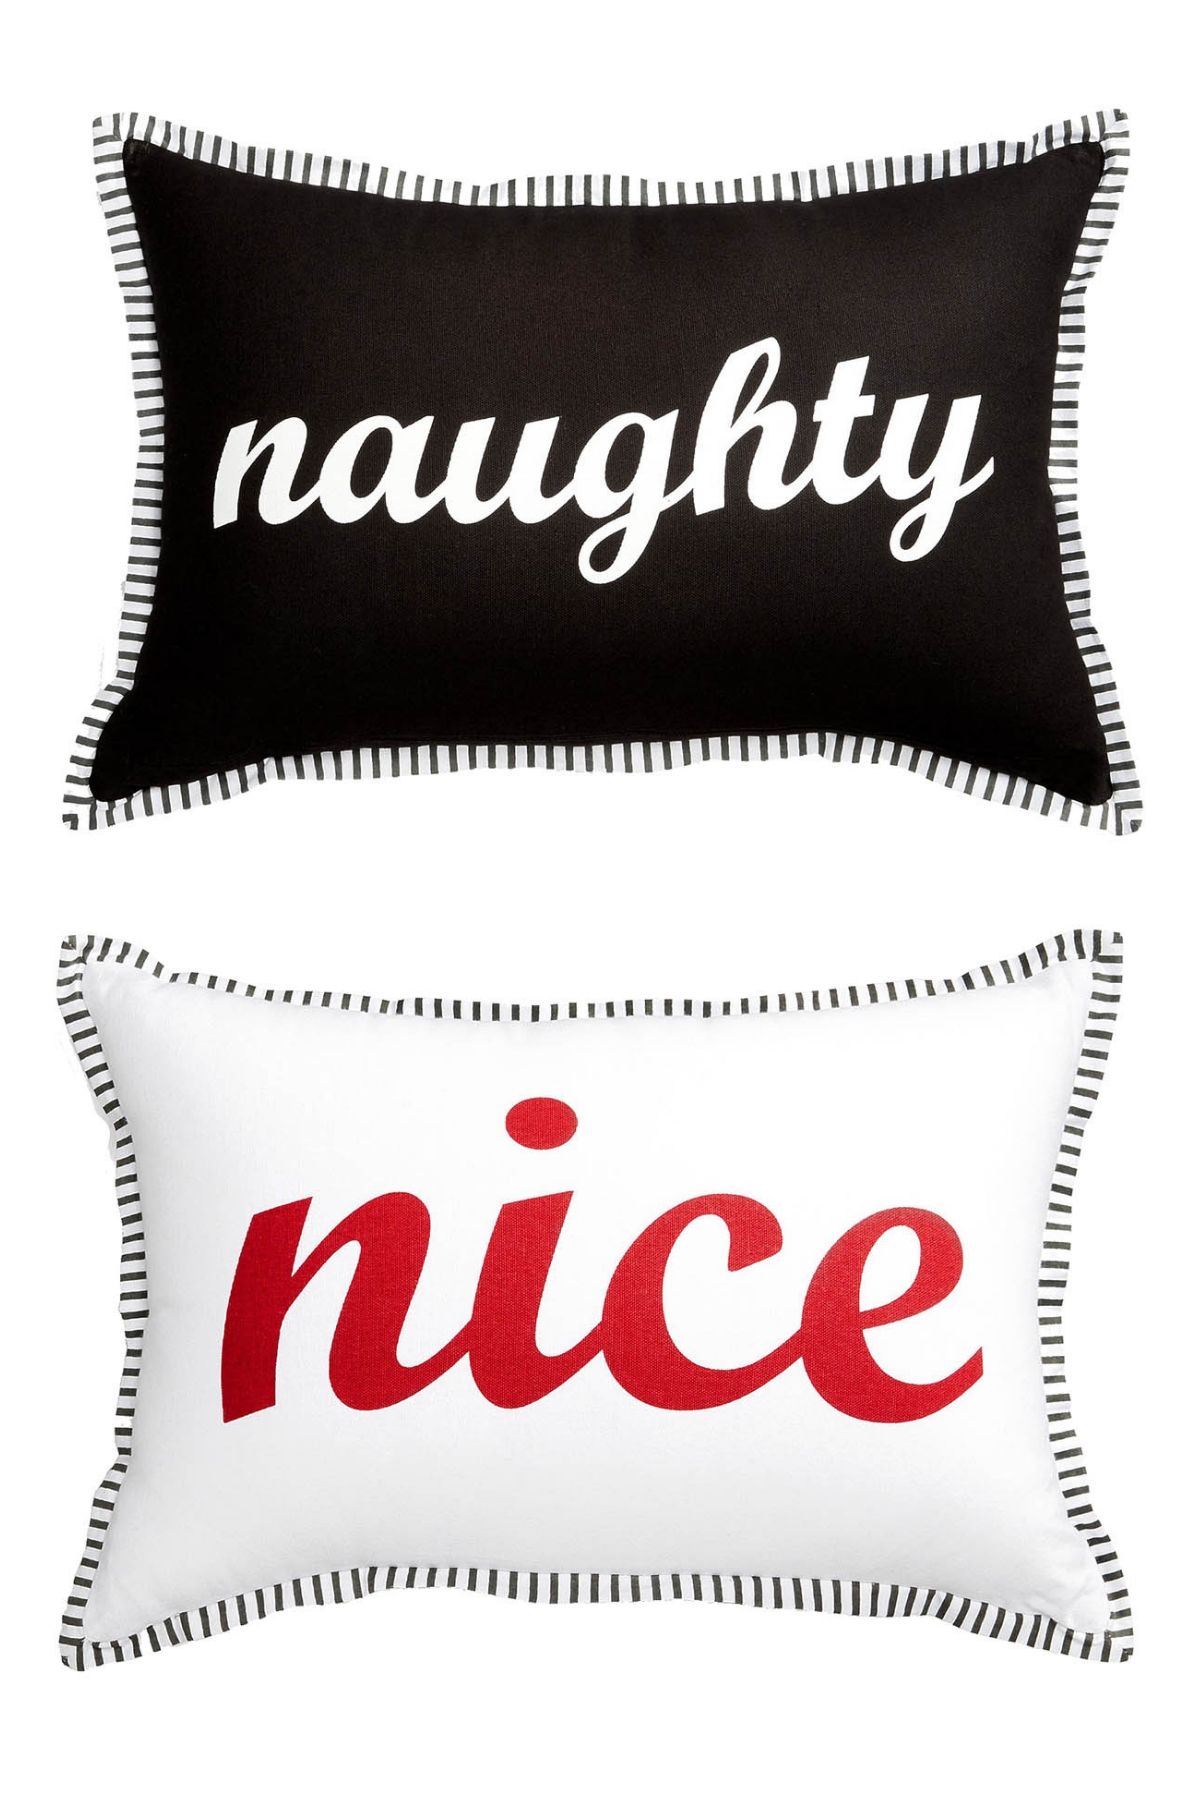 Celebrate Shop Naughty And Nice 13x20 Reversible Throw Pillow